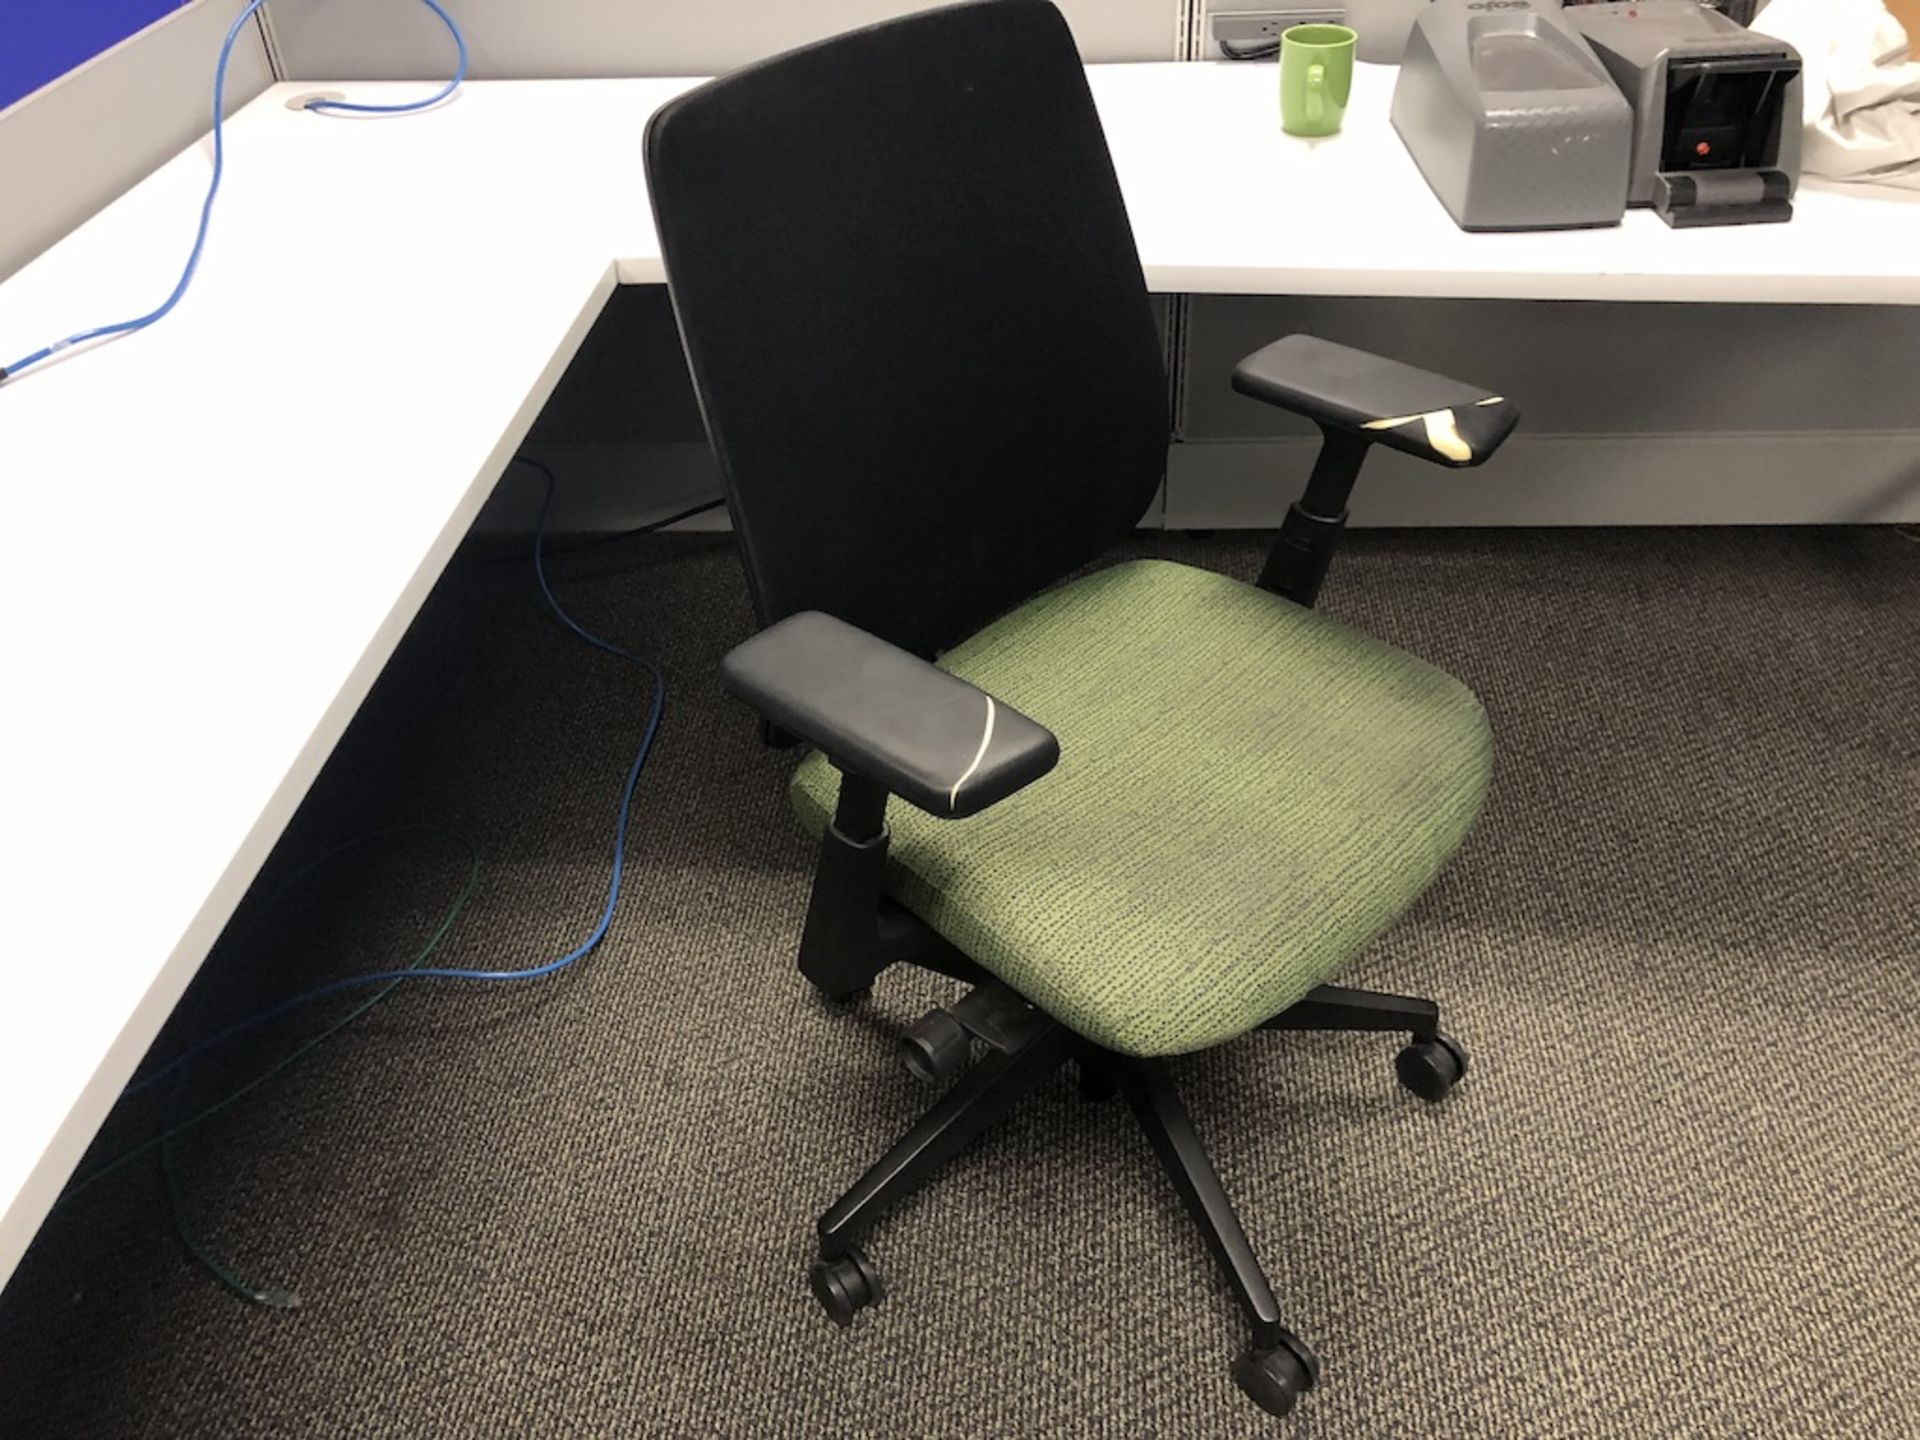 5 CASTER OFFICE CHAIR PADDED ARM REST, GREEN SEATED CUSHION, MESH BACK SUPPORT   SCHNEIDER ELECTRIC- - Image 2 of 3